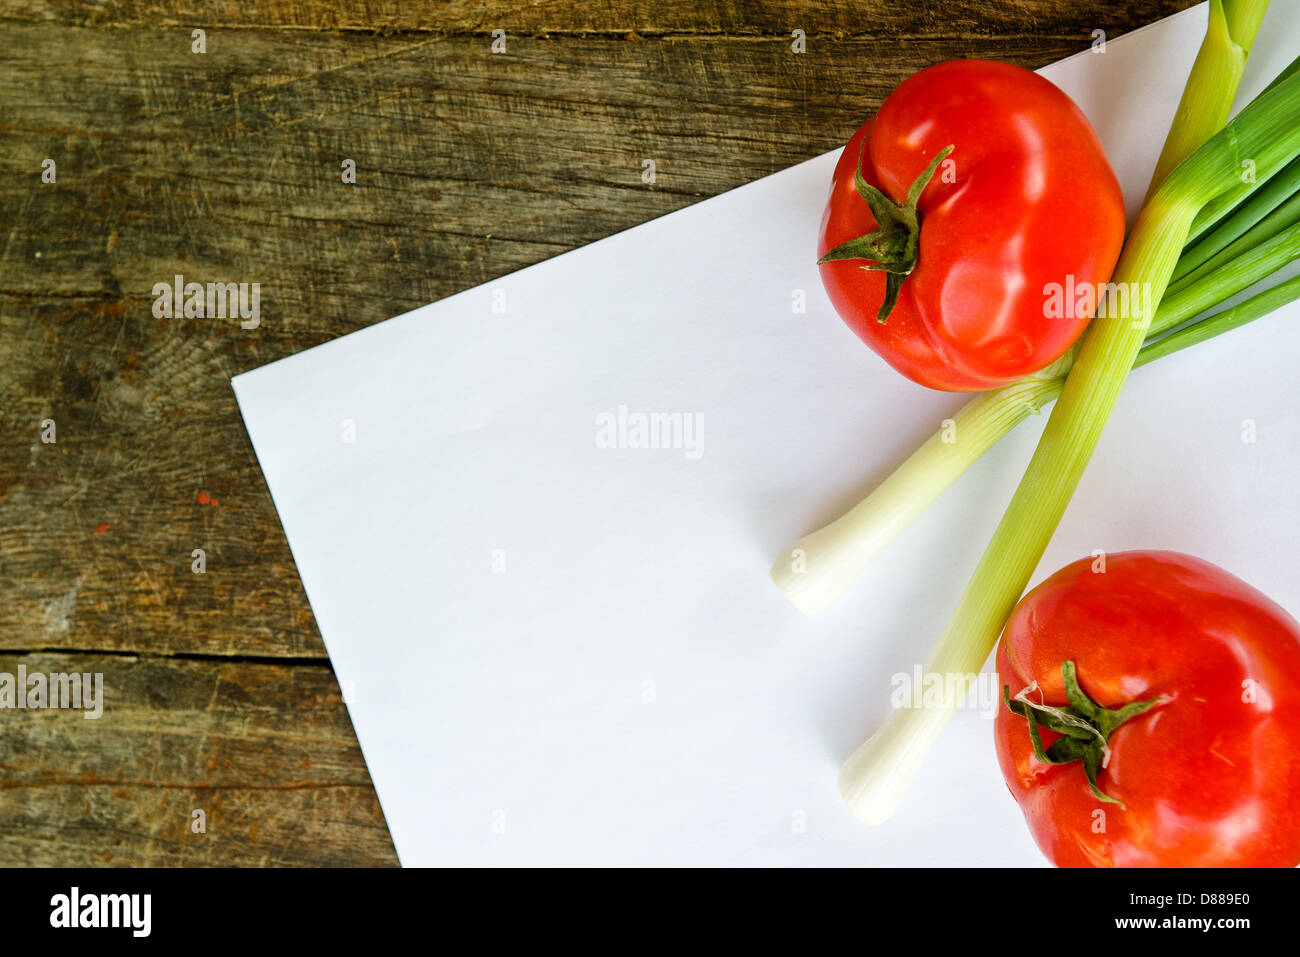 Tomato and spring onion on paper for recipe notes, on wooden table. Stock Photo